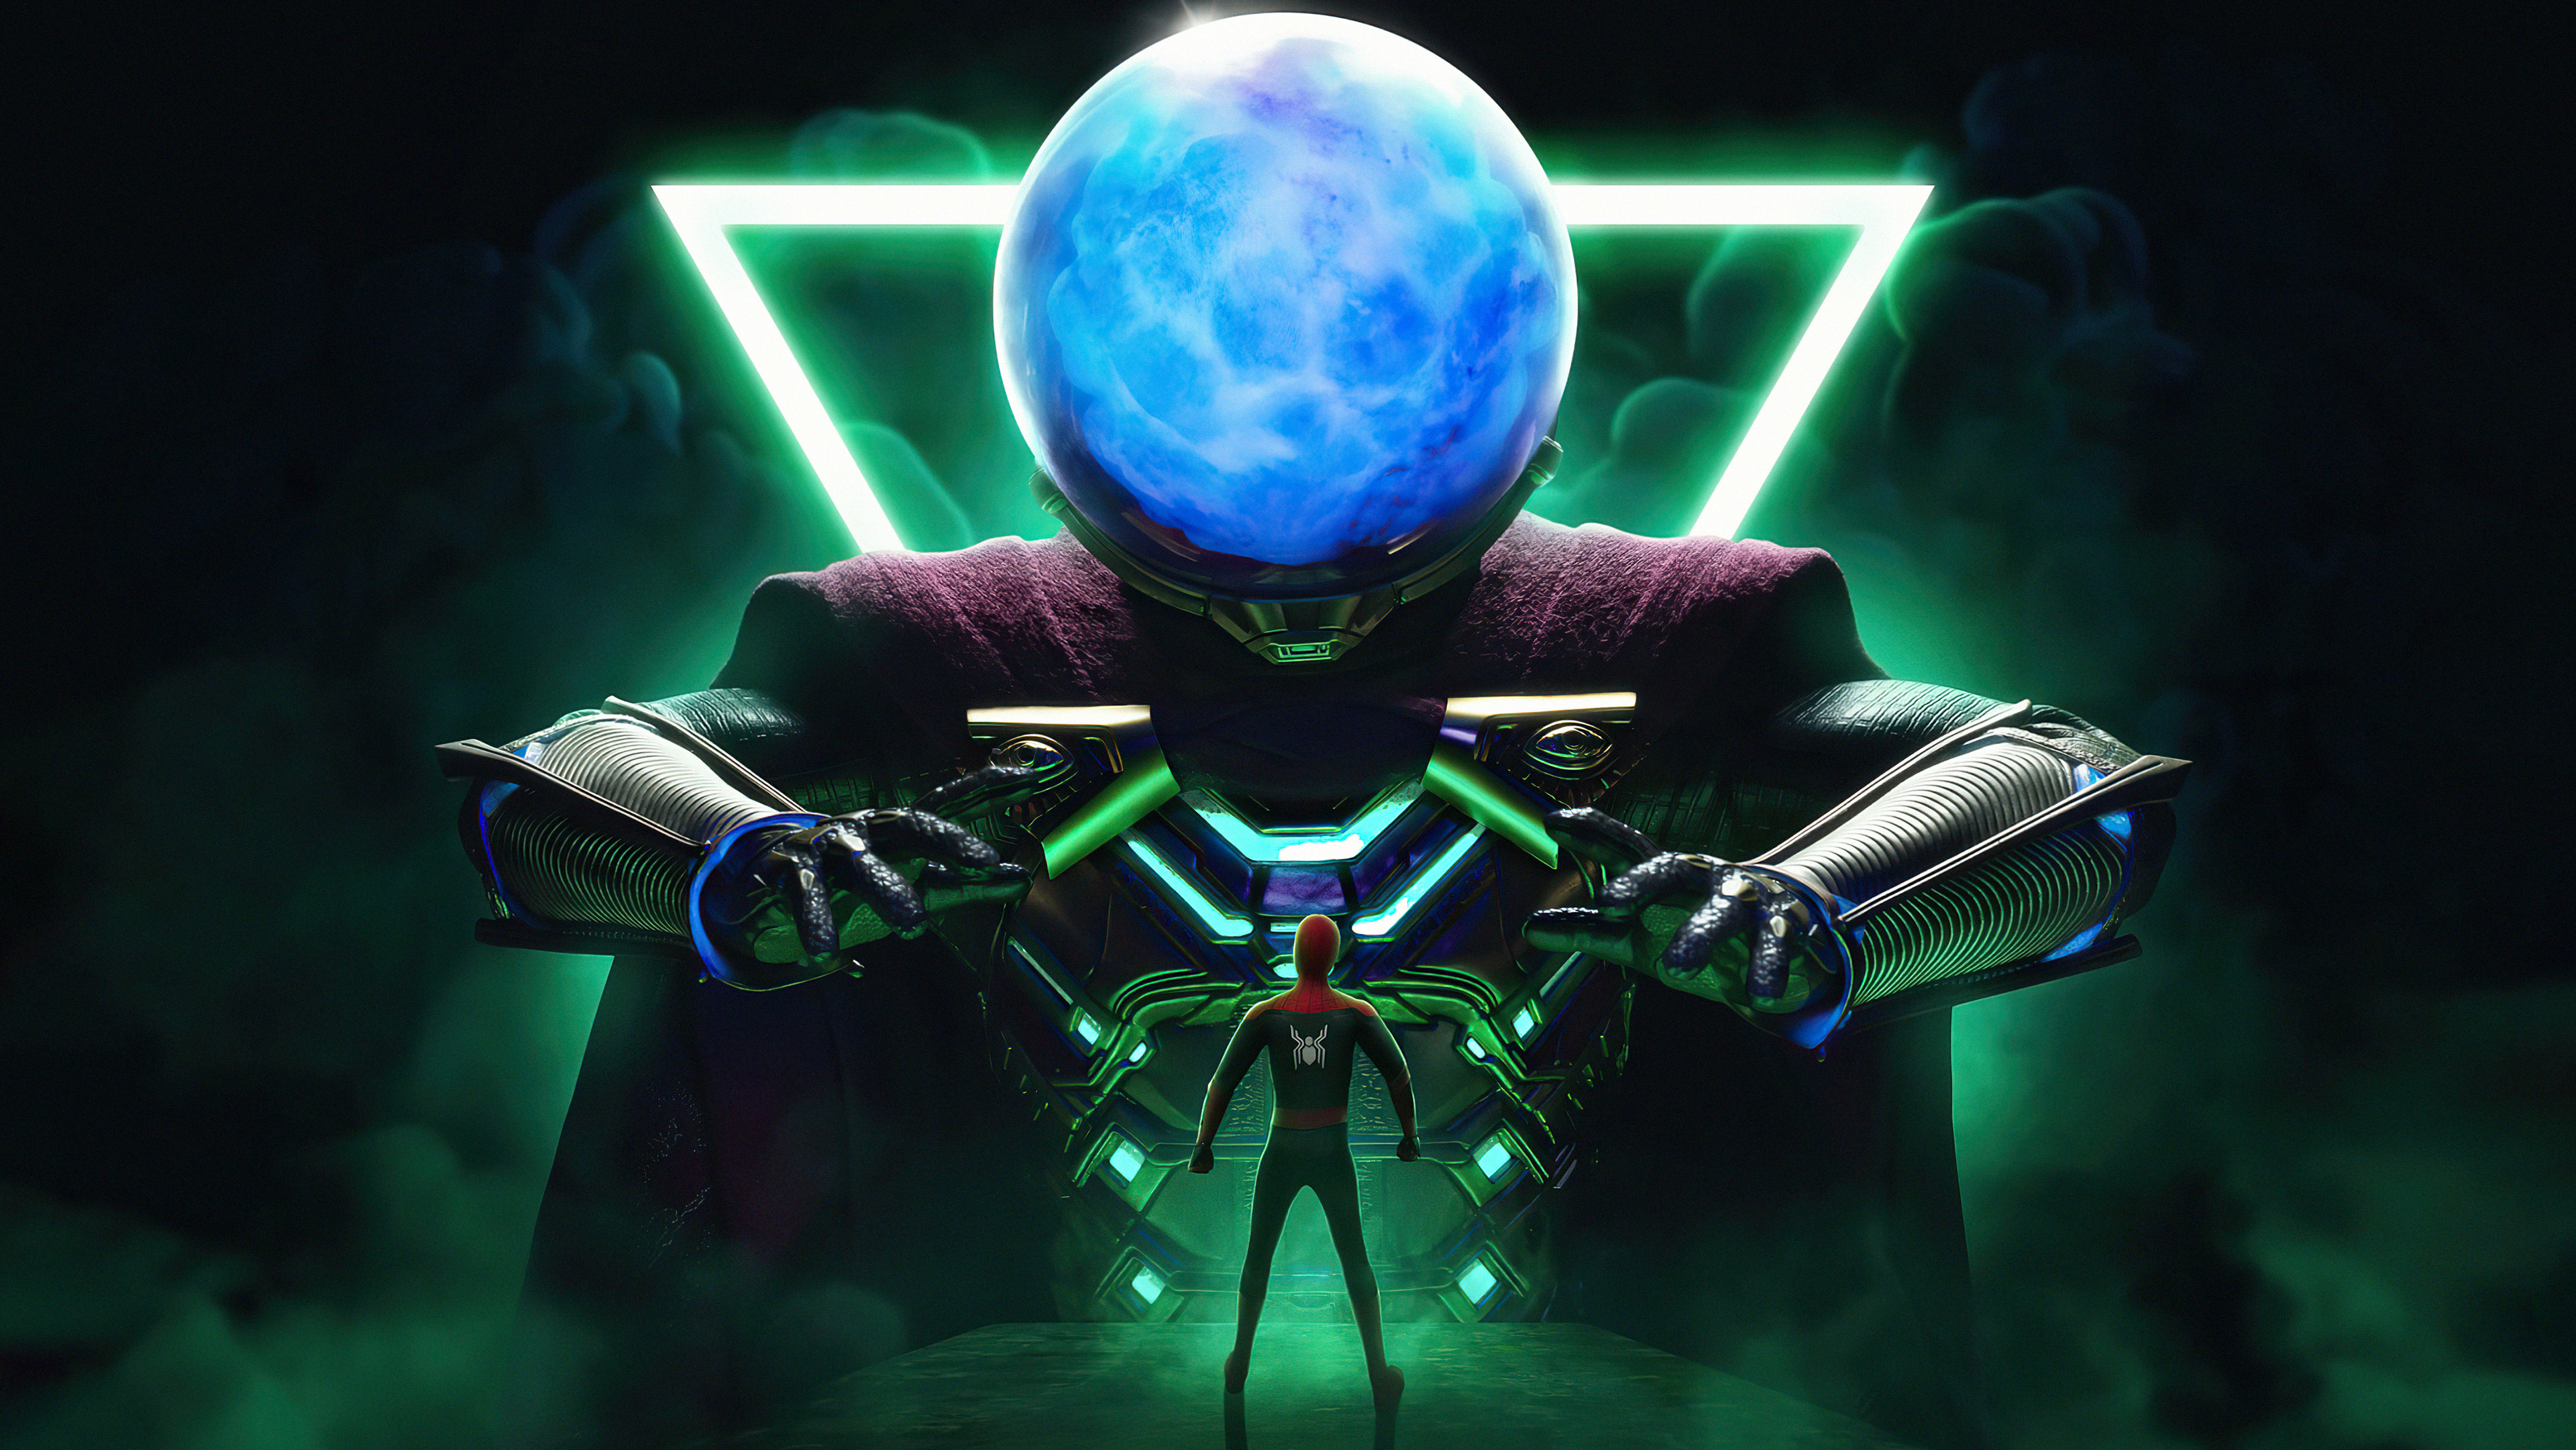 Mysterio Marvel Wallpapers